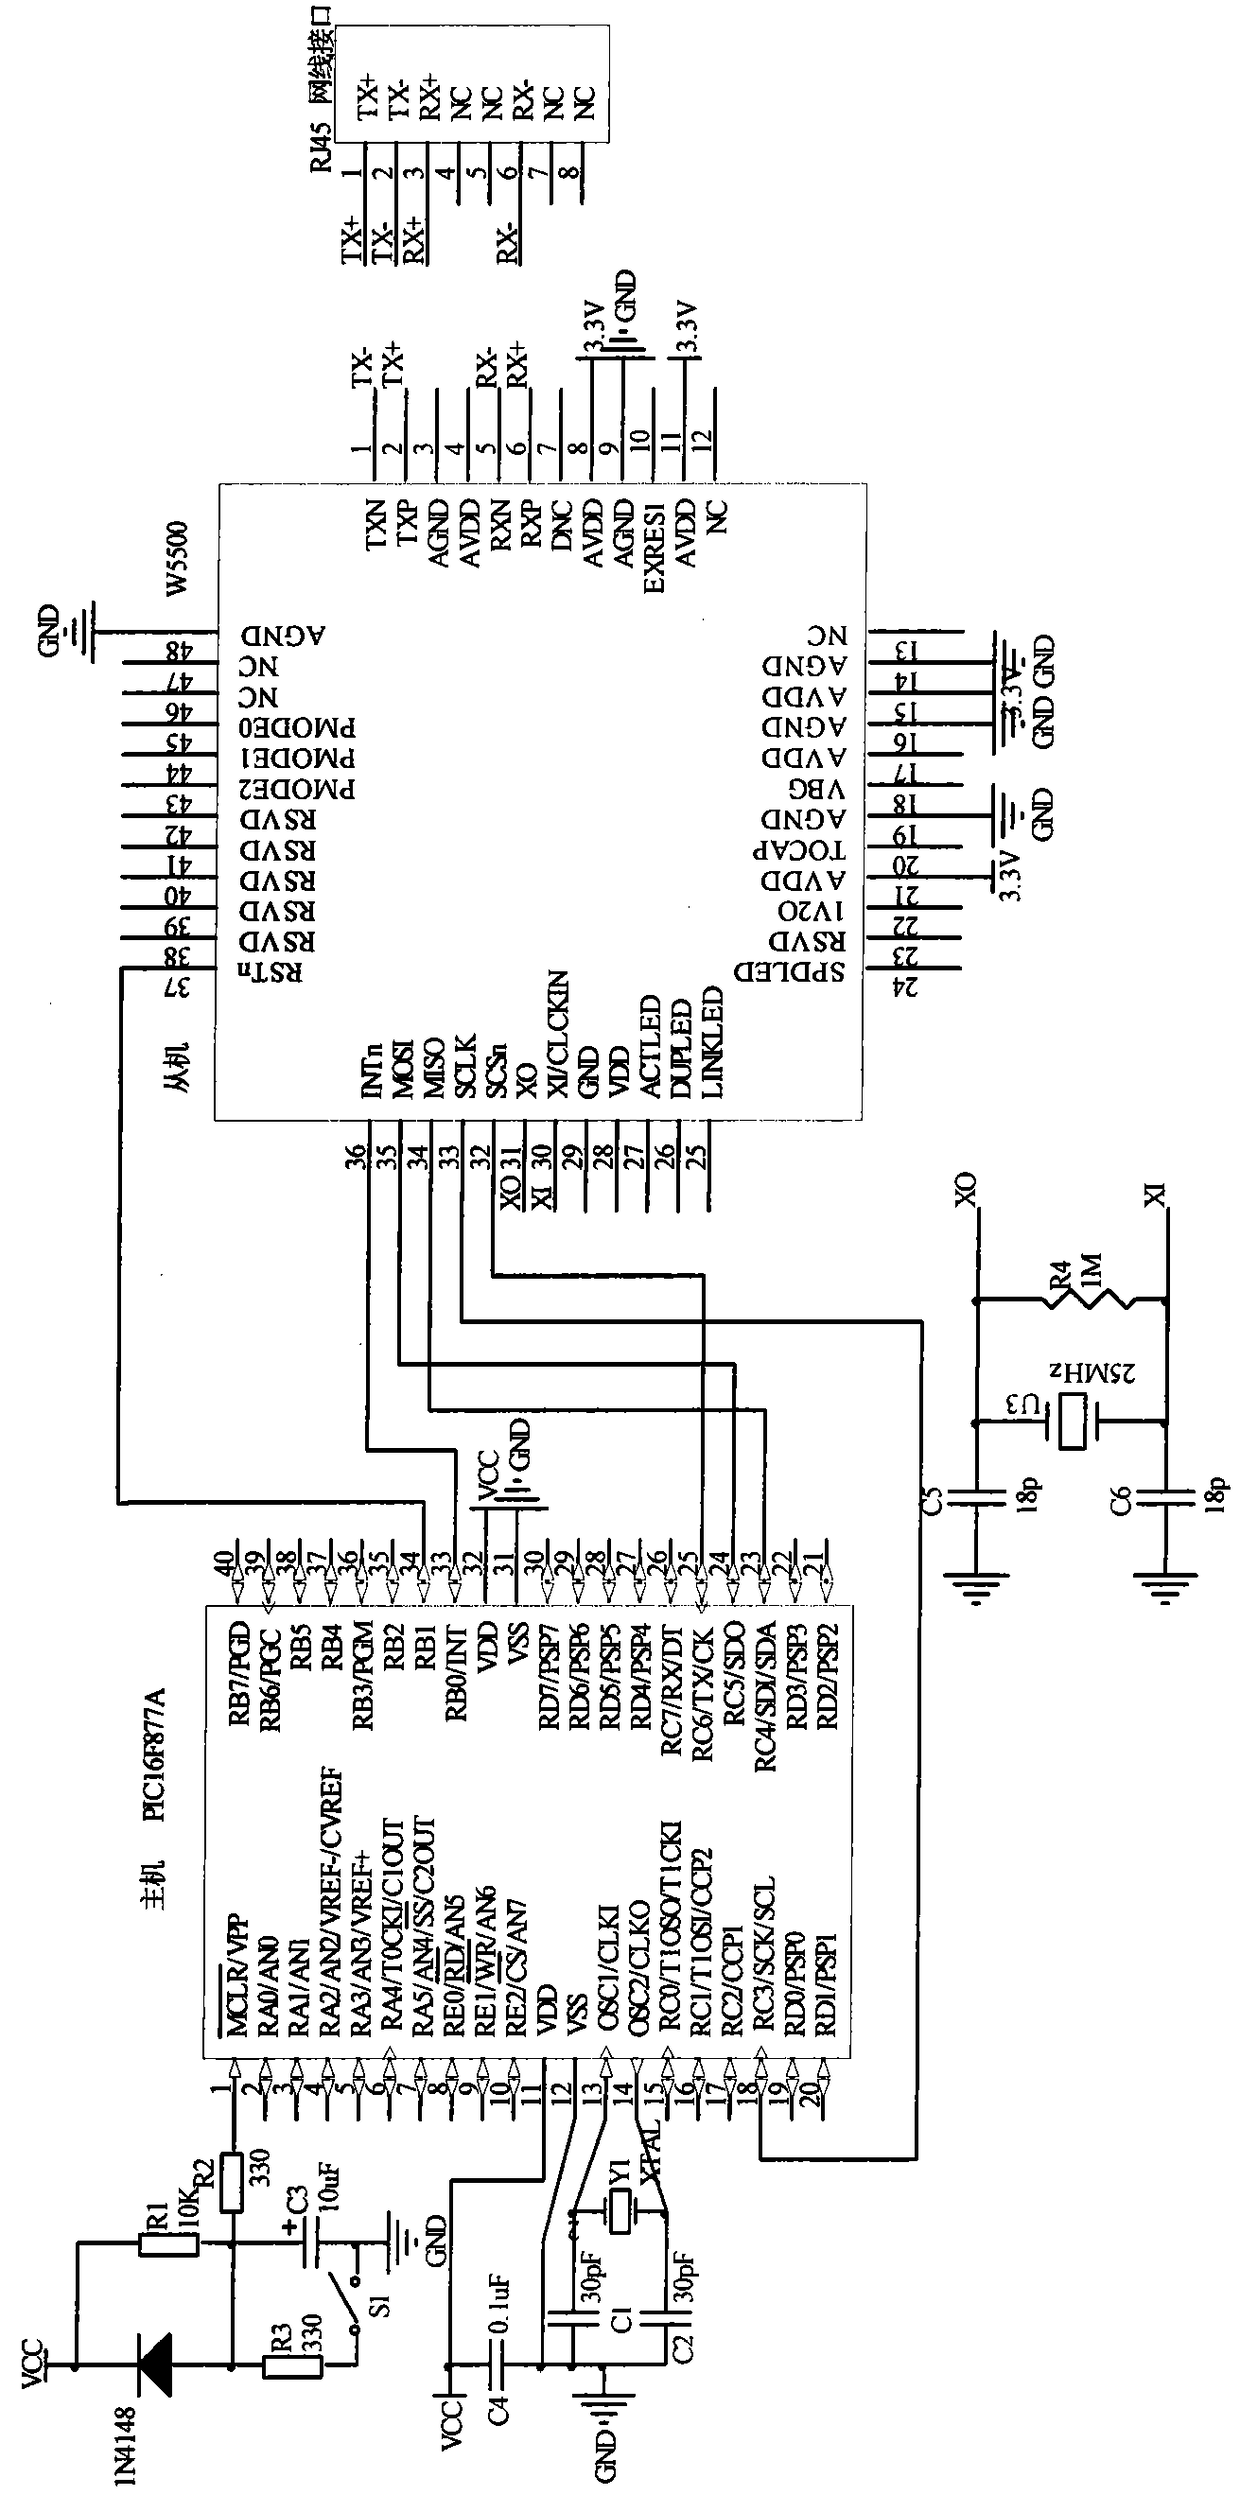 A sewage treatment plant tcp/ip local area network automatic control system and method